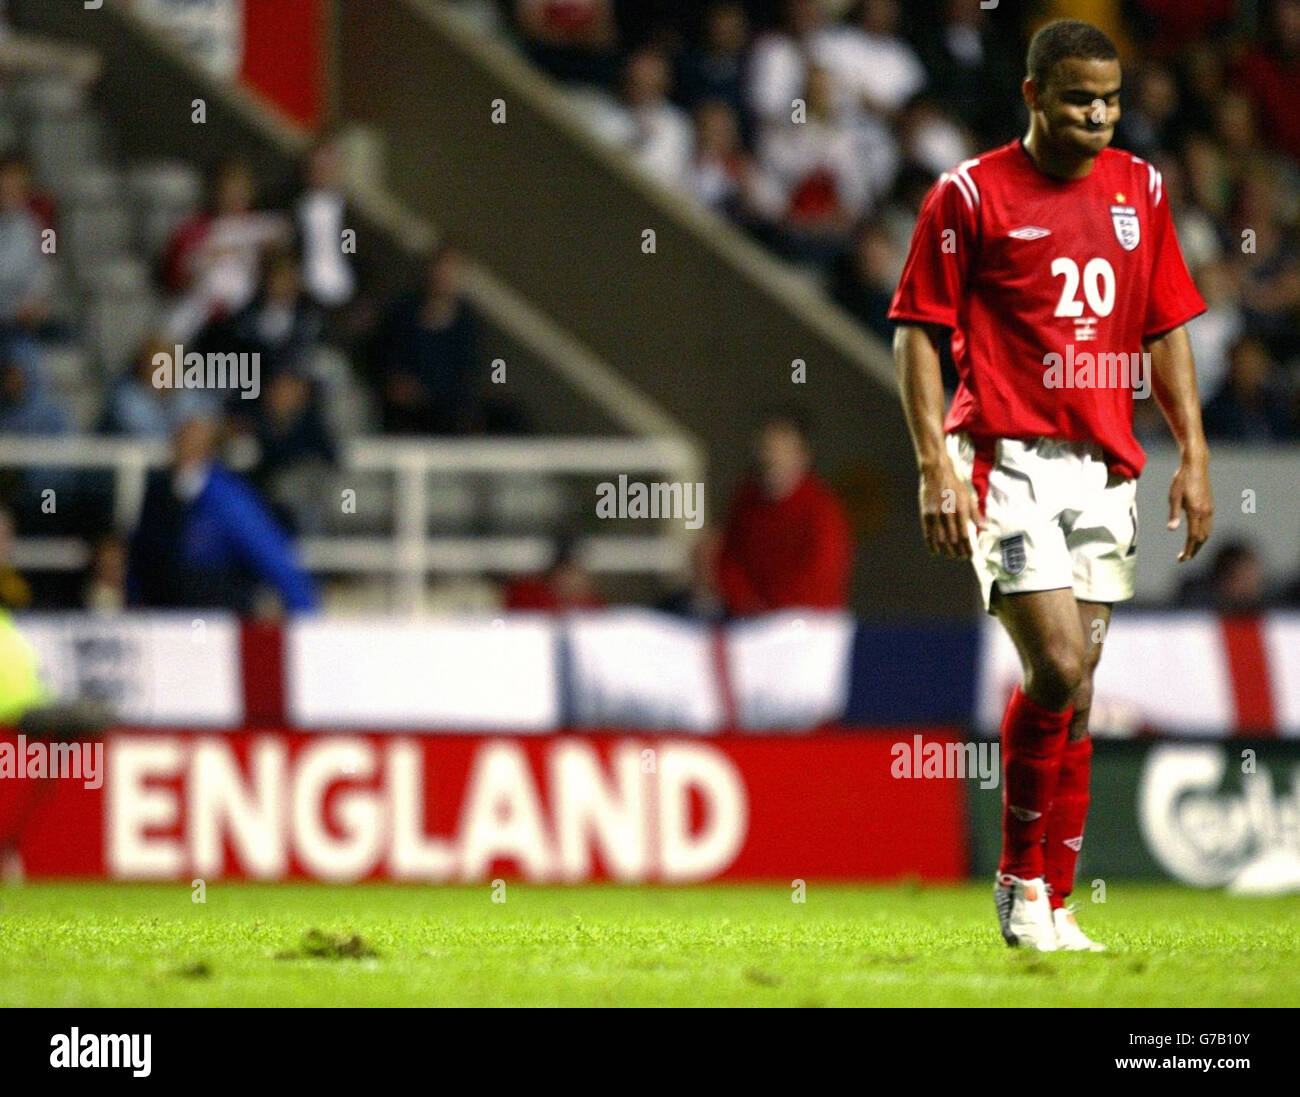 Kieron Dyer leaves the pitch after being booed by fans during the England and Ukraine international friendly match at St James' Park, Newcastle. Stock Photo